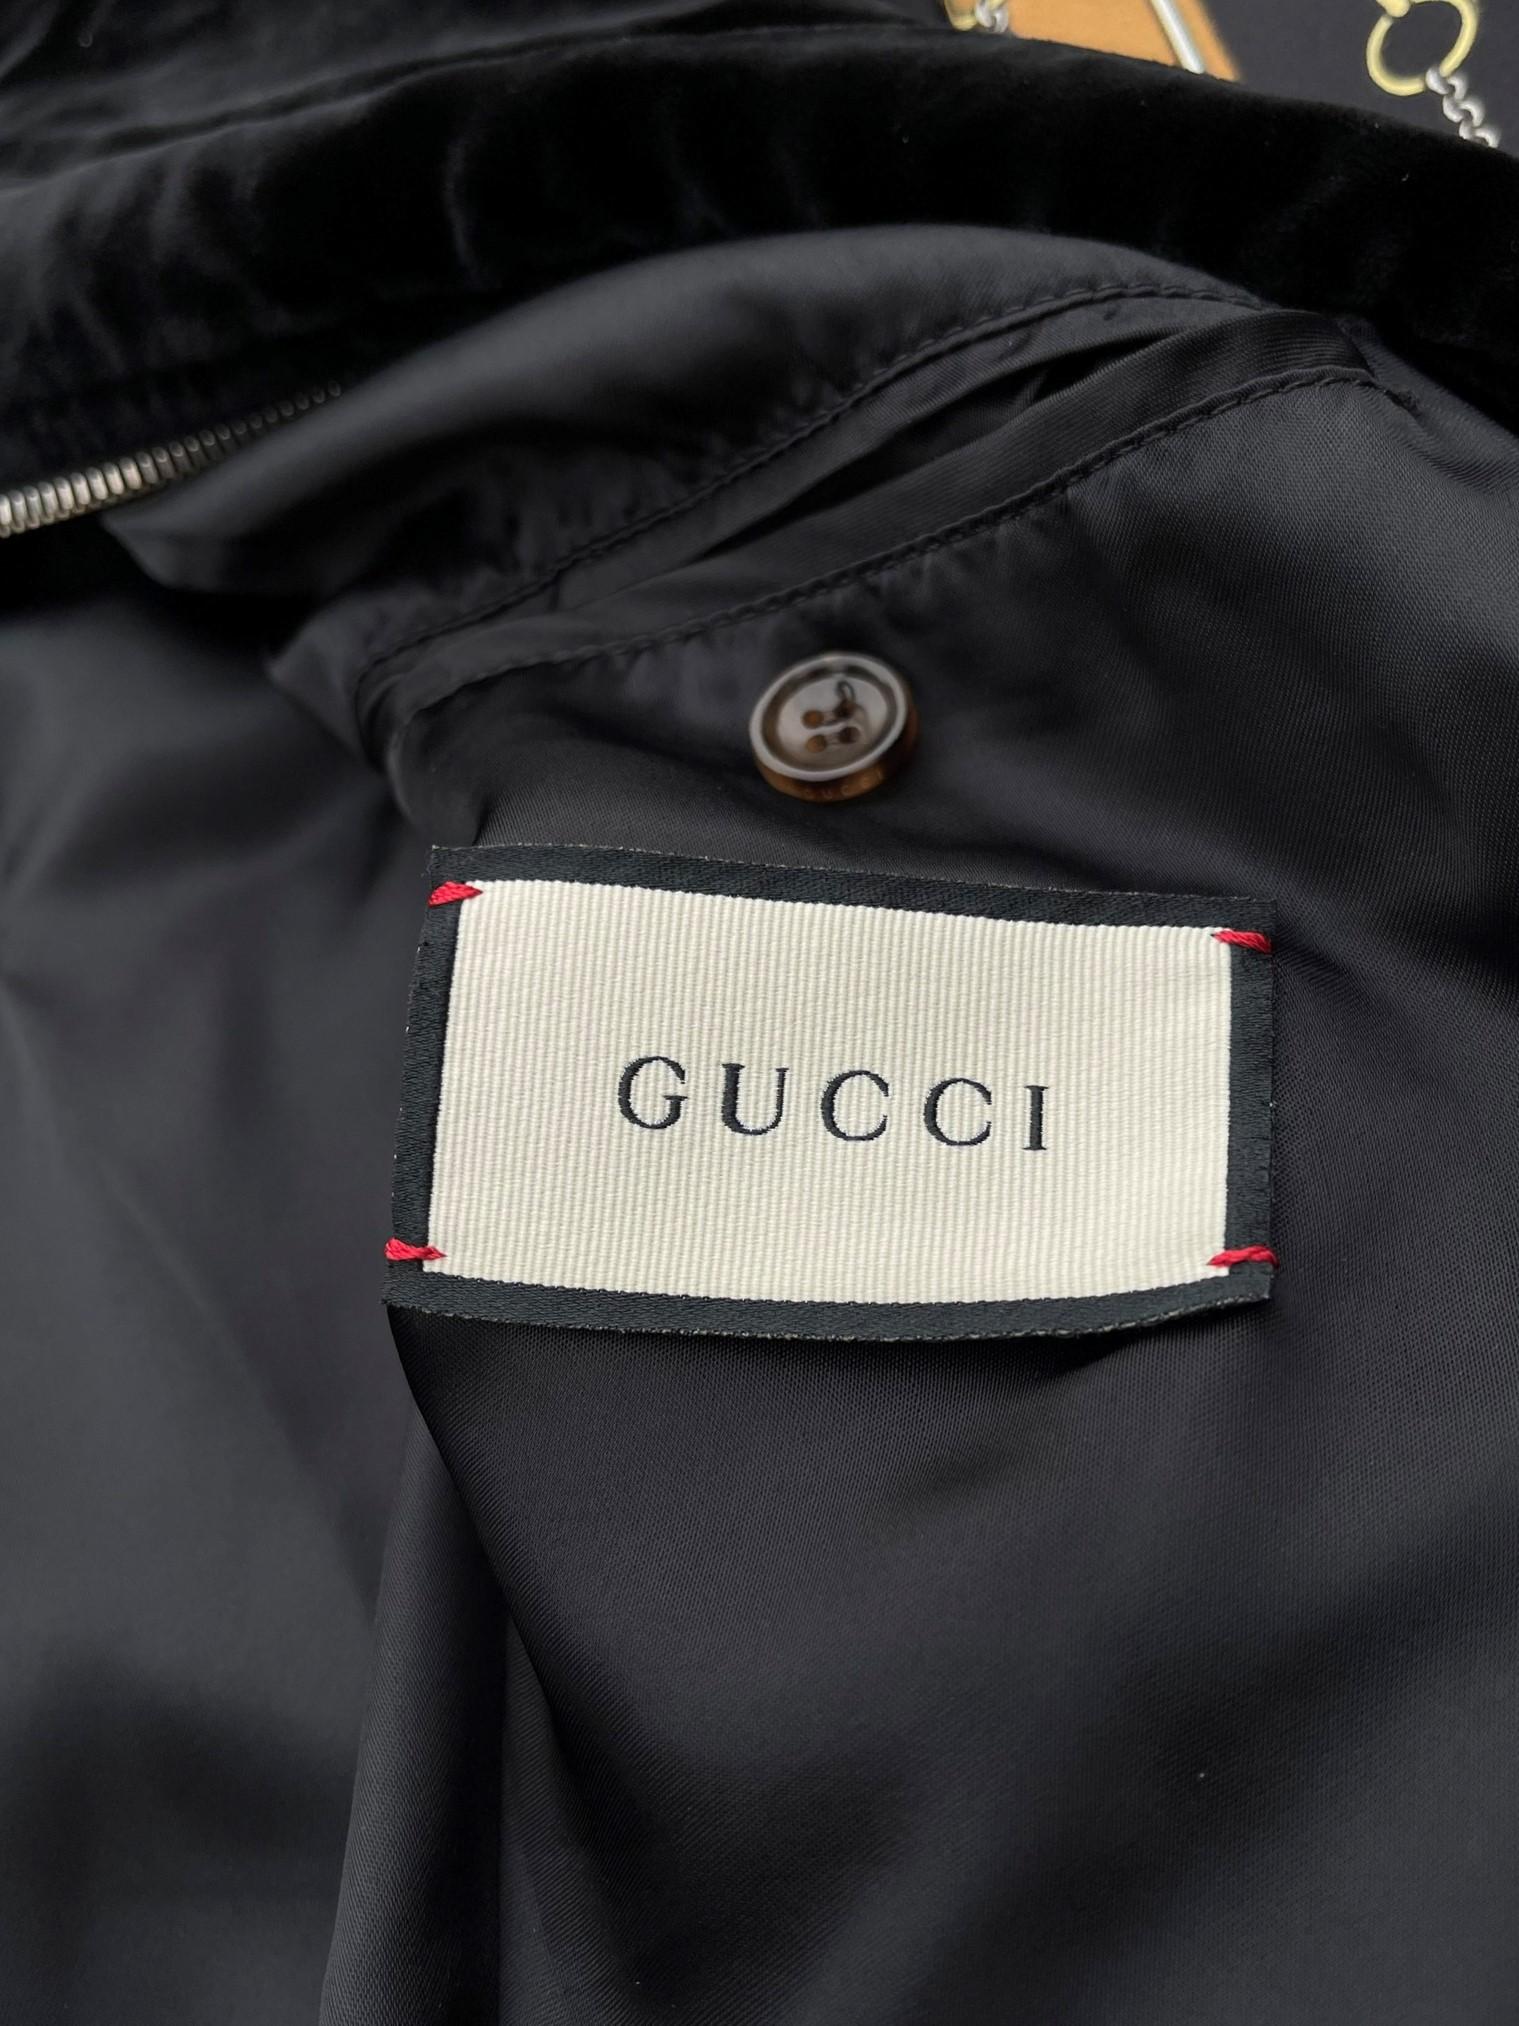 Gucci Velour Horsebit Track Jacket, Autumn Winter 2019. For Sale at ...